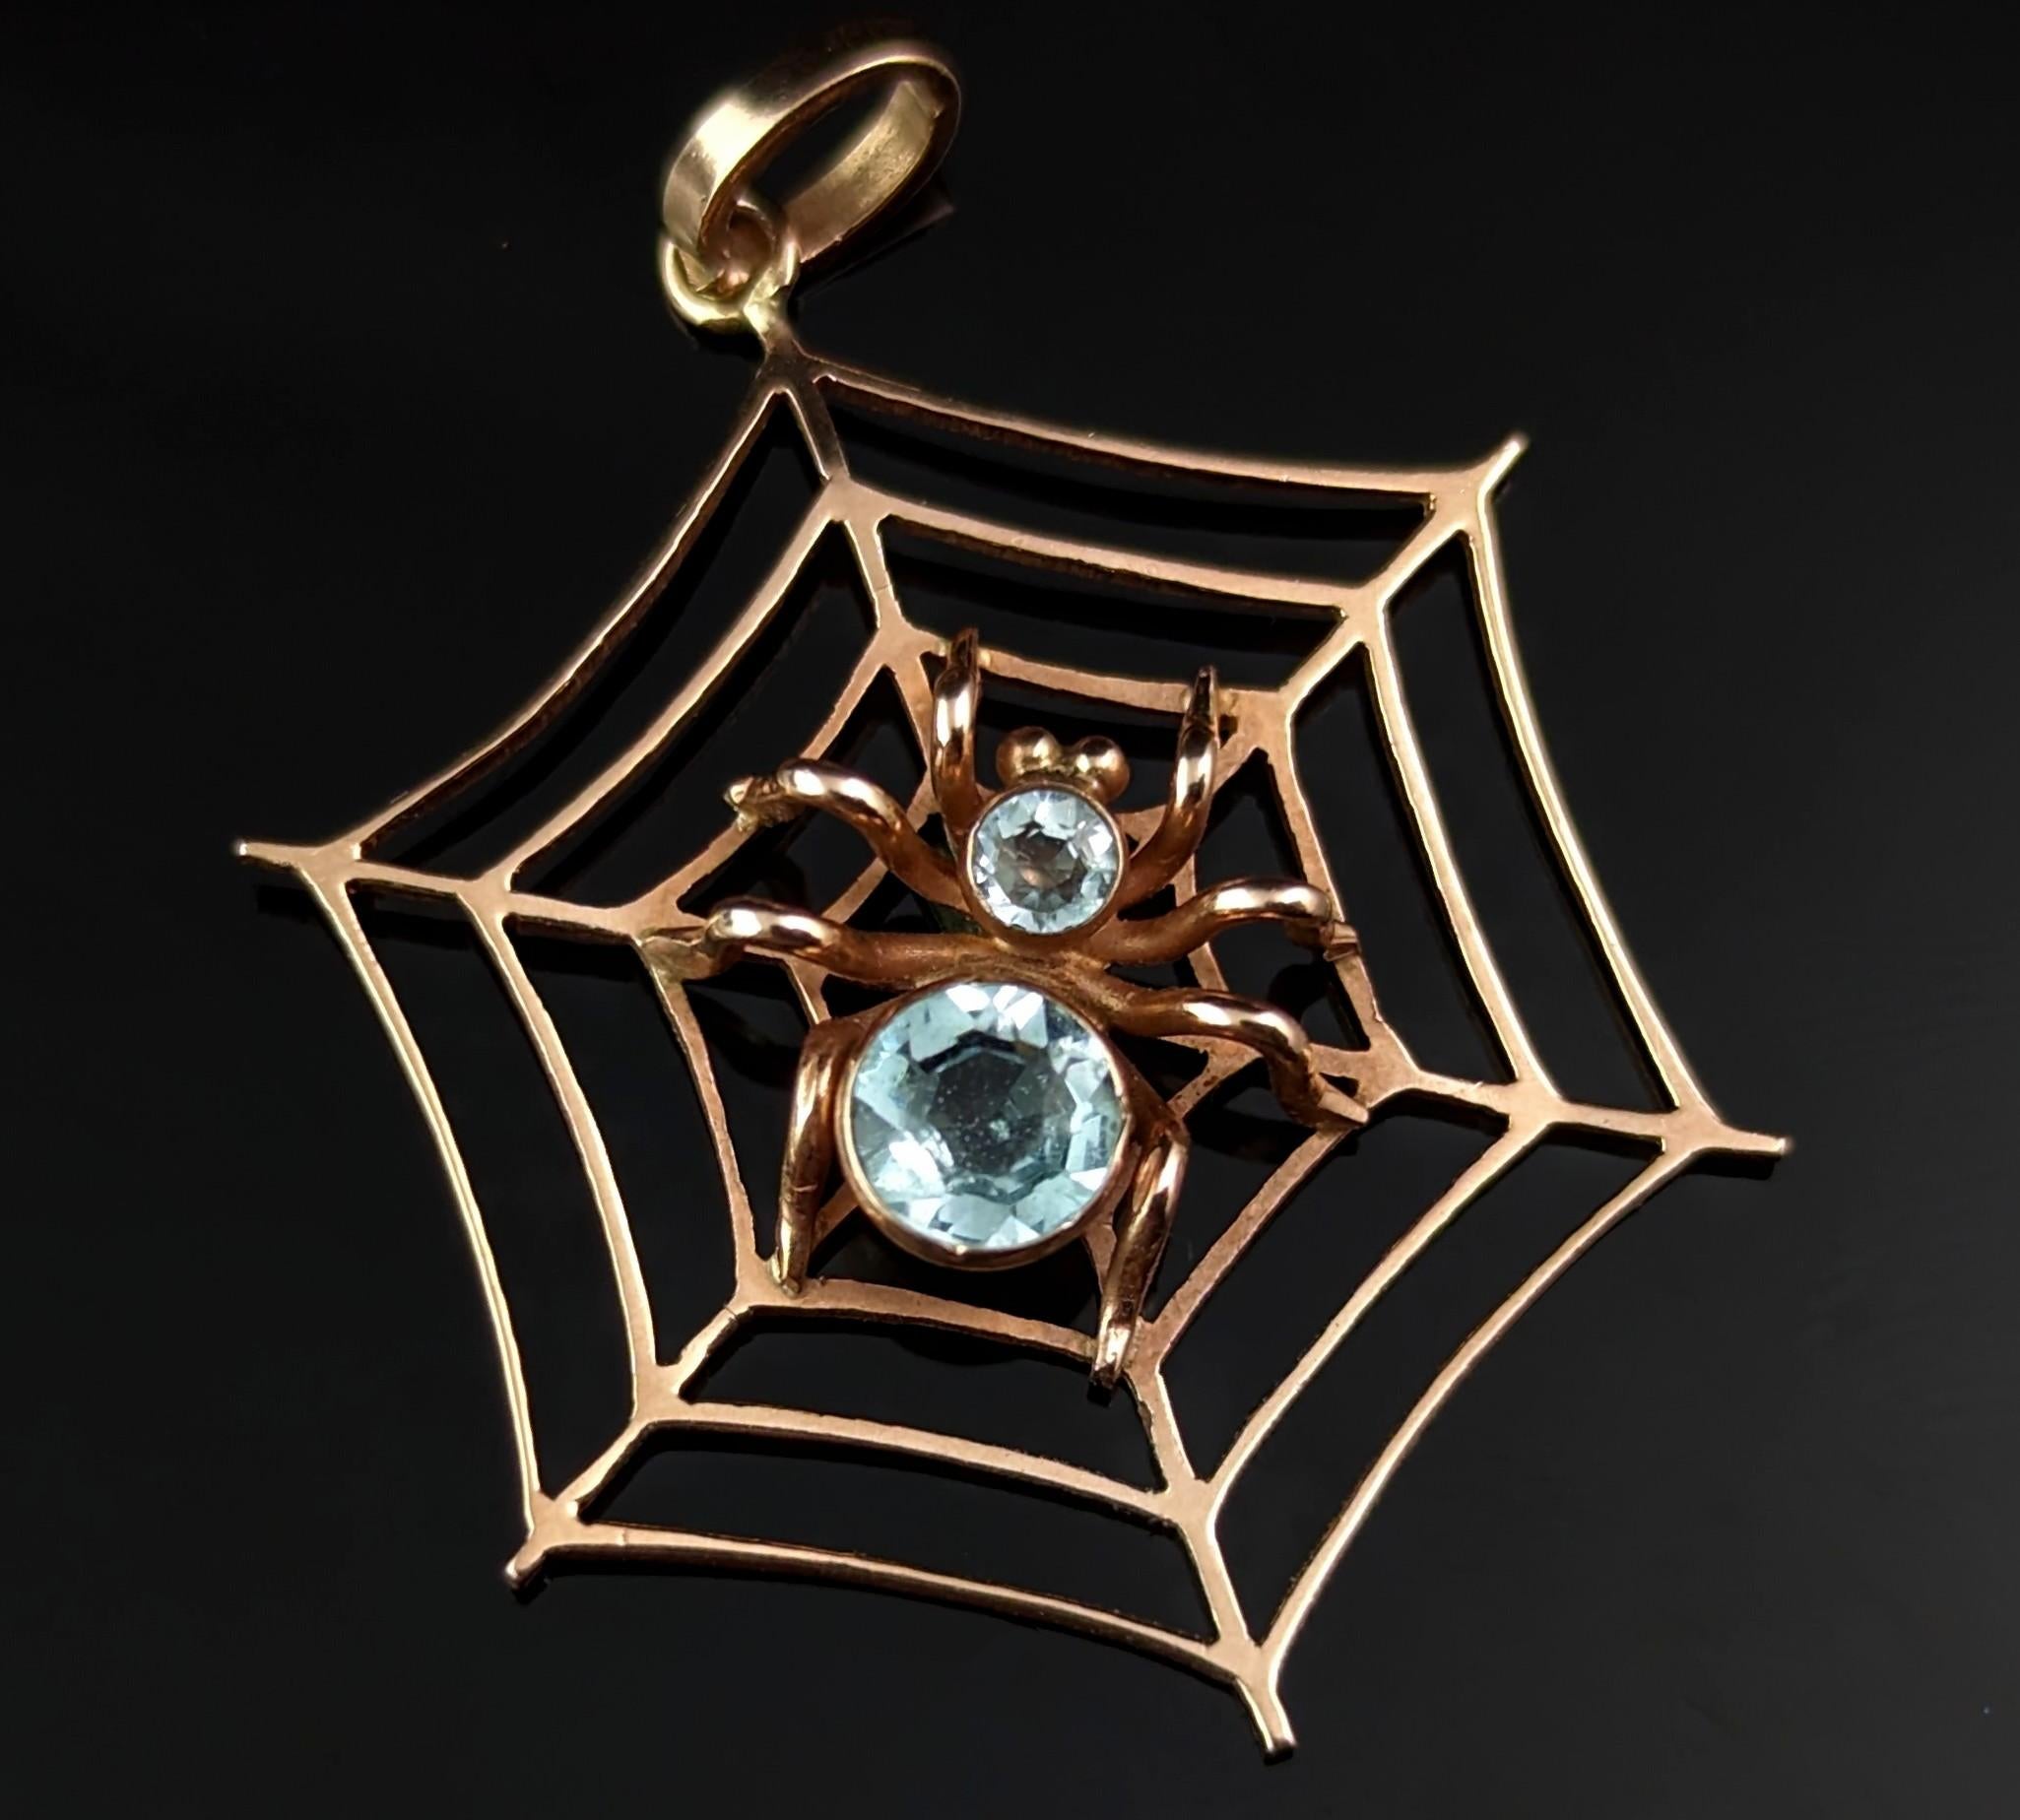 Spider lover or not you are bound to fall in love with this wonderful antique spider and spider web pendant.

The spider and spider web motifs are much harder to find in pendant form with most adorning brooches, the Victorian's began somewhat of an